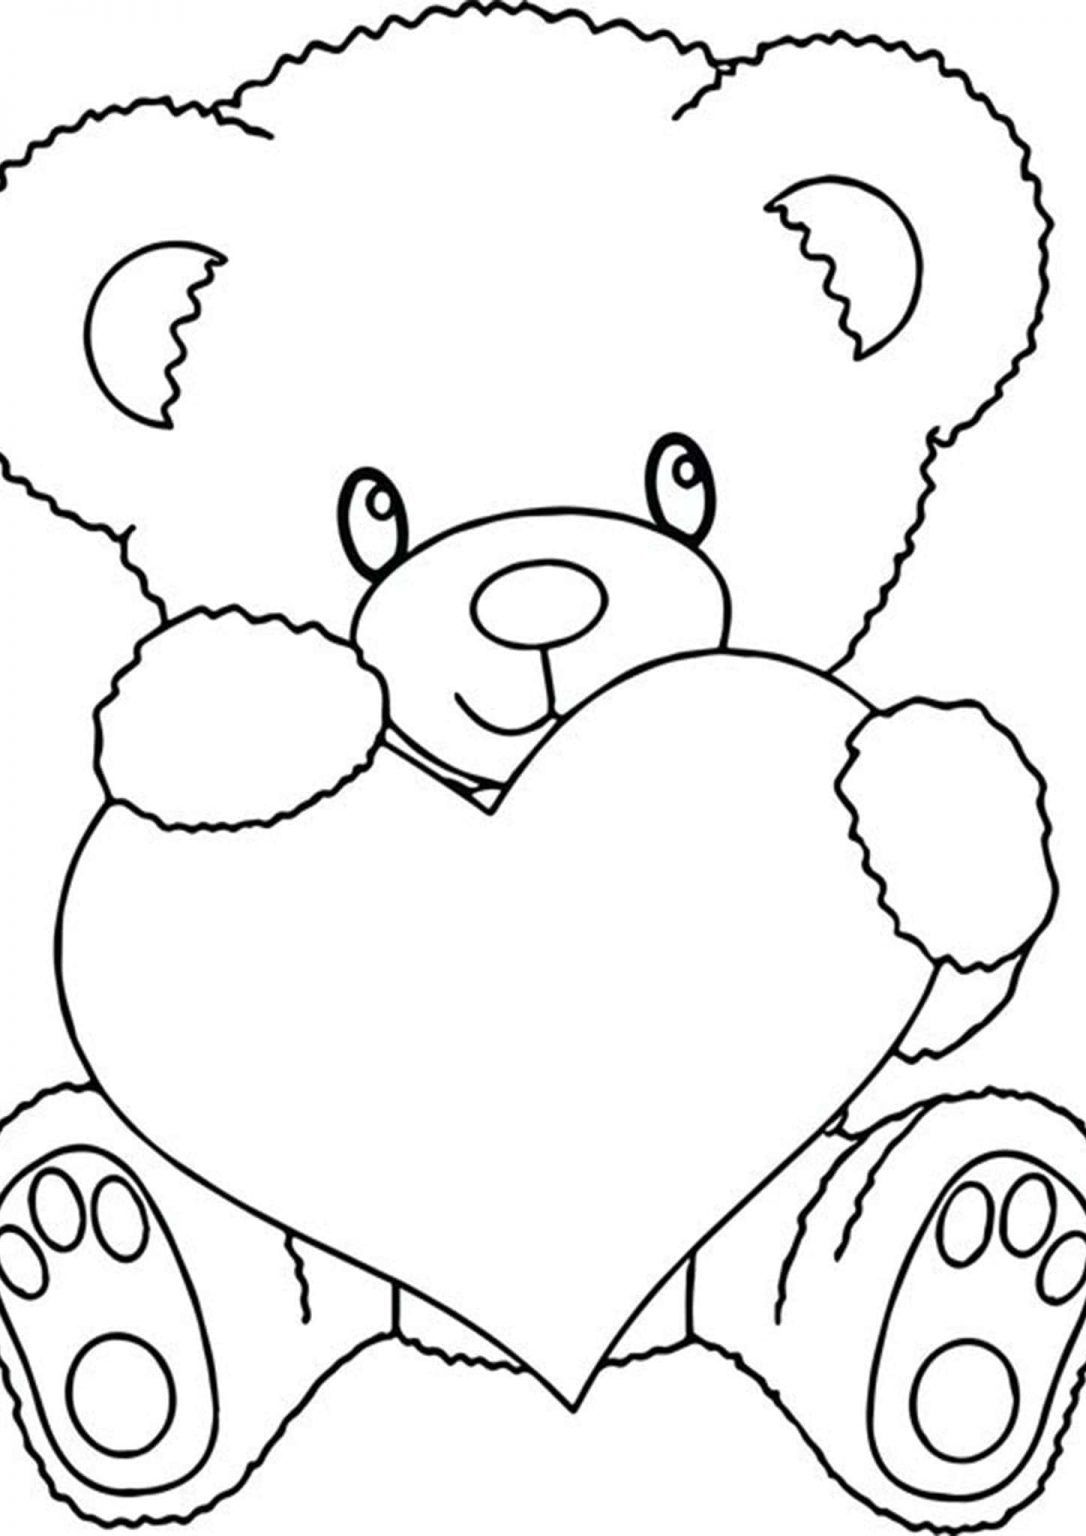 Free & Easy To Print Bear Coloring Pages | Heart coloring pages, Valentine coloring  pages, Teddy bear coloring pages